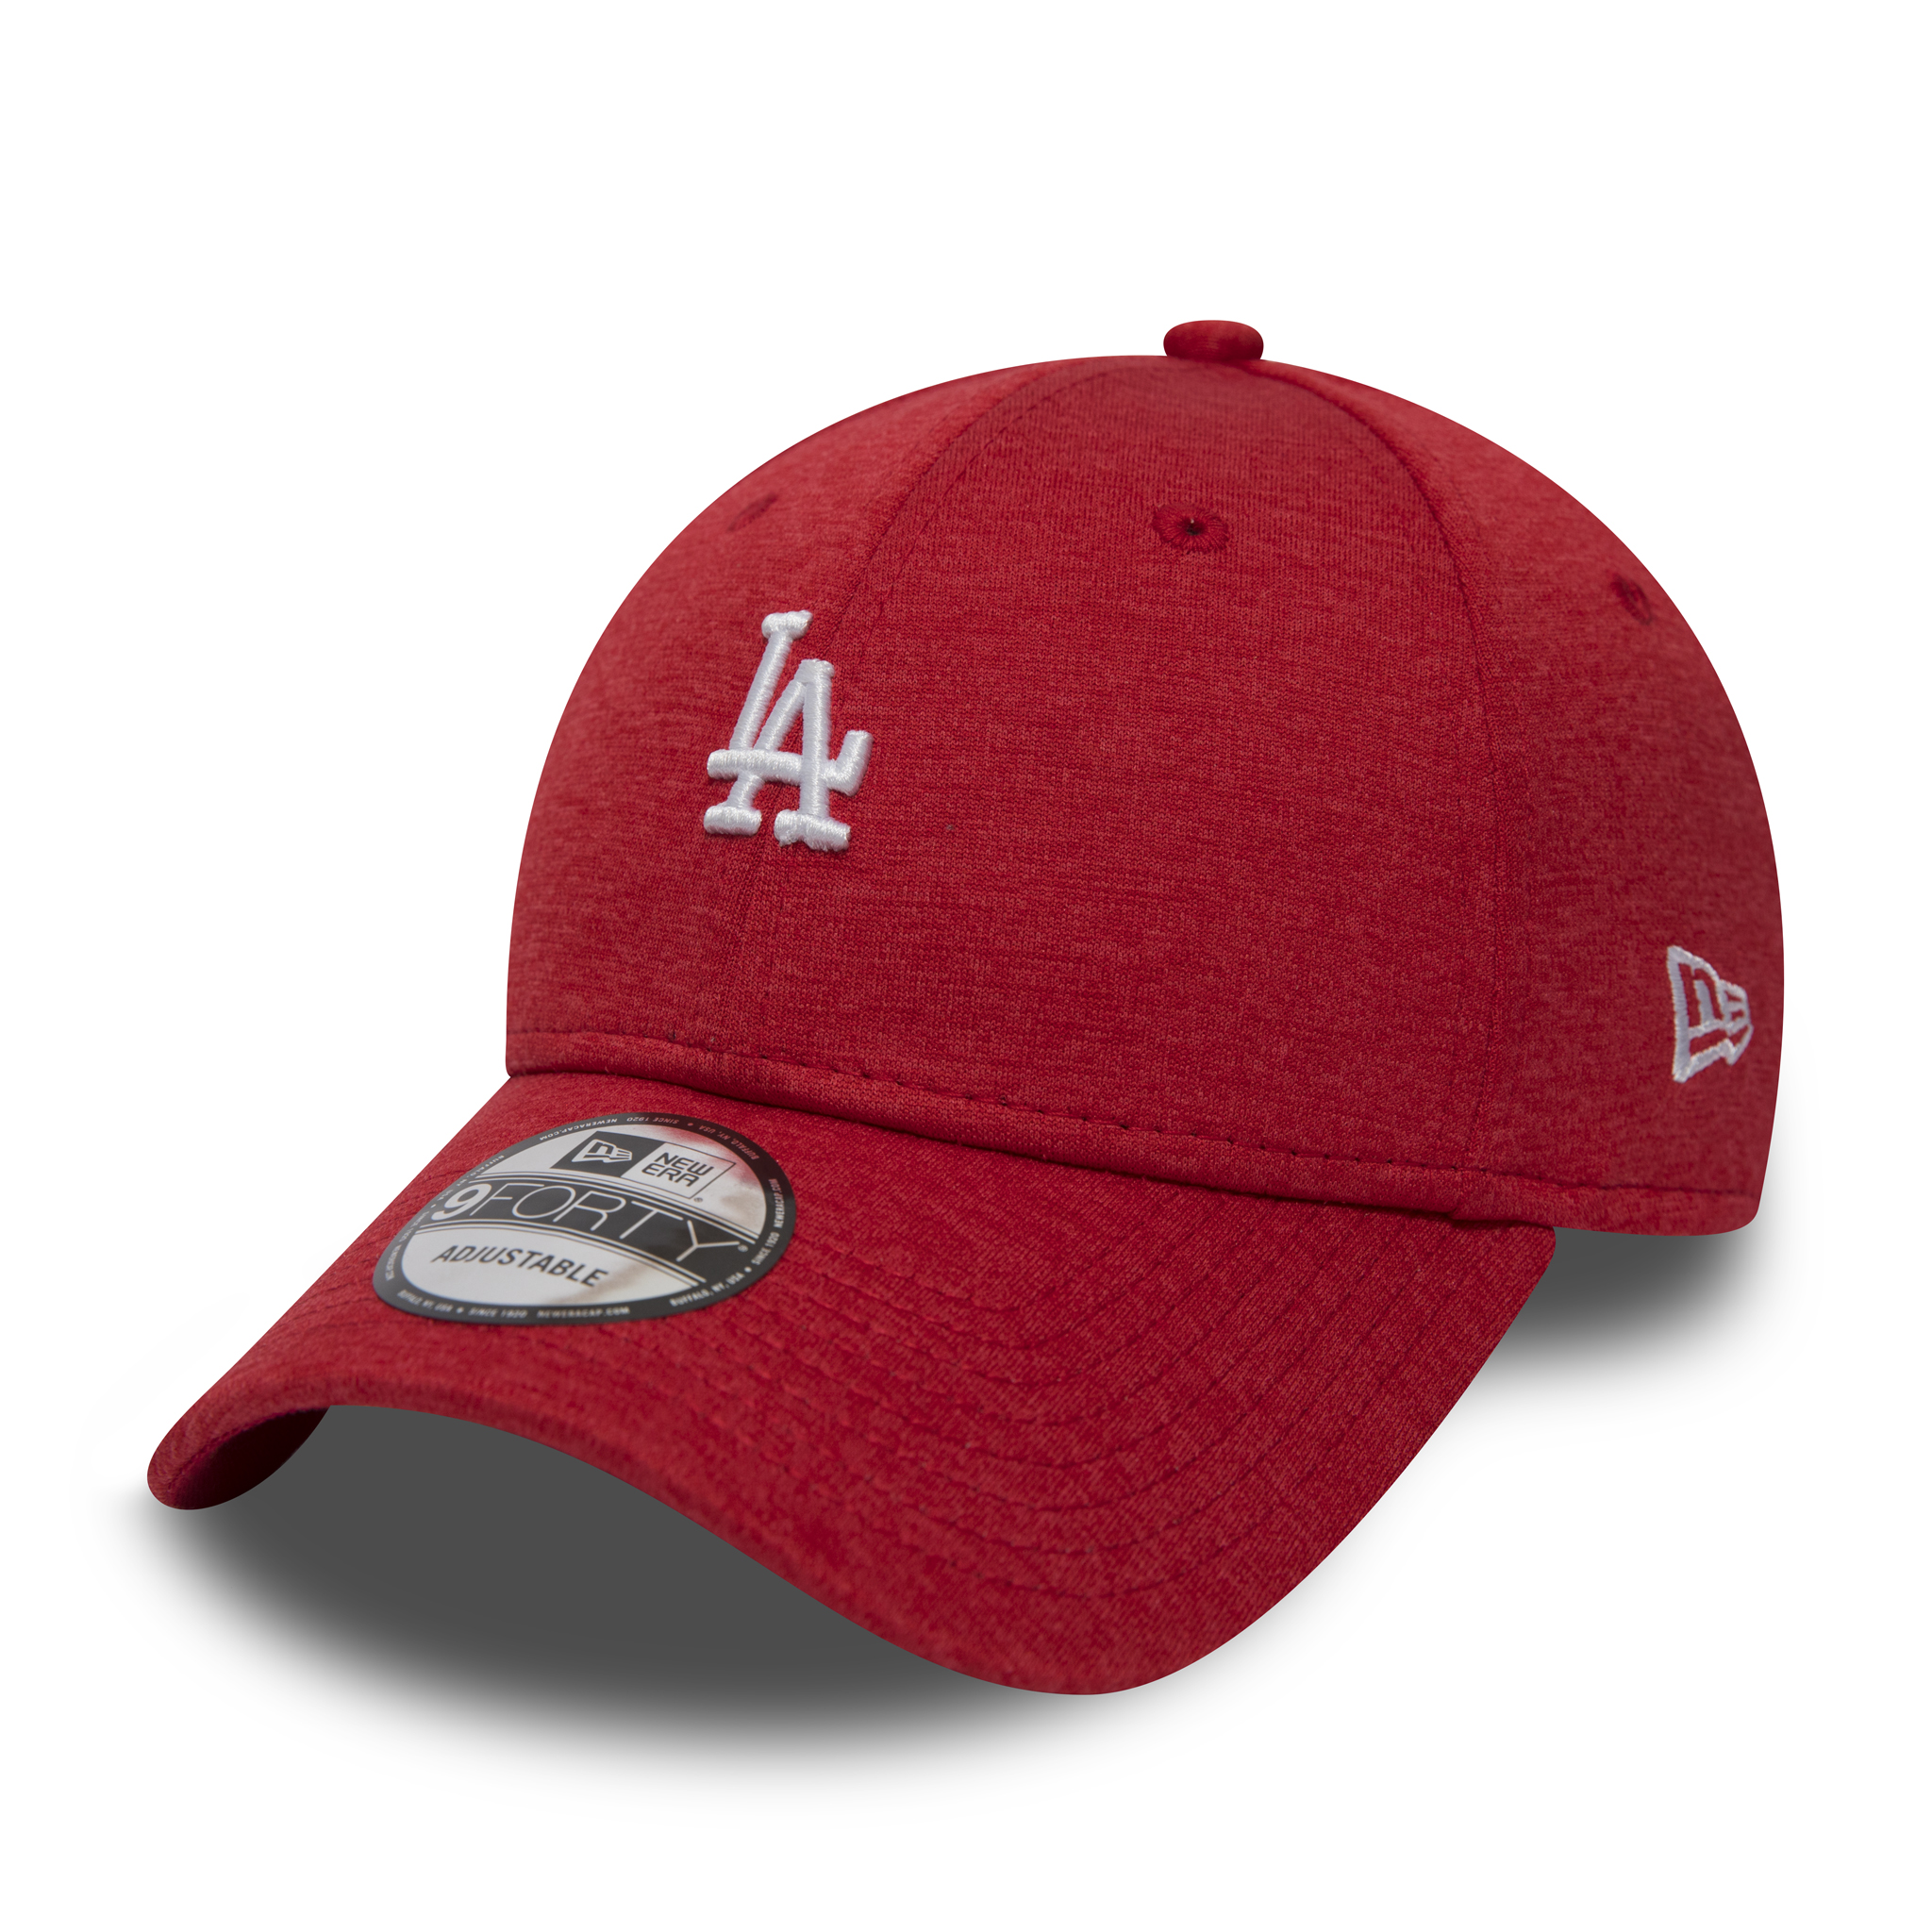 Los Angeles Dodgers 9FORTY-Kappe in Scharlachrot